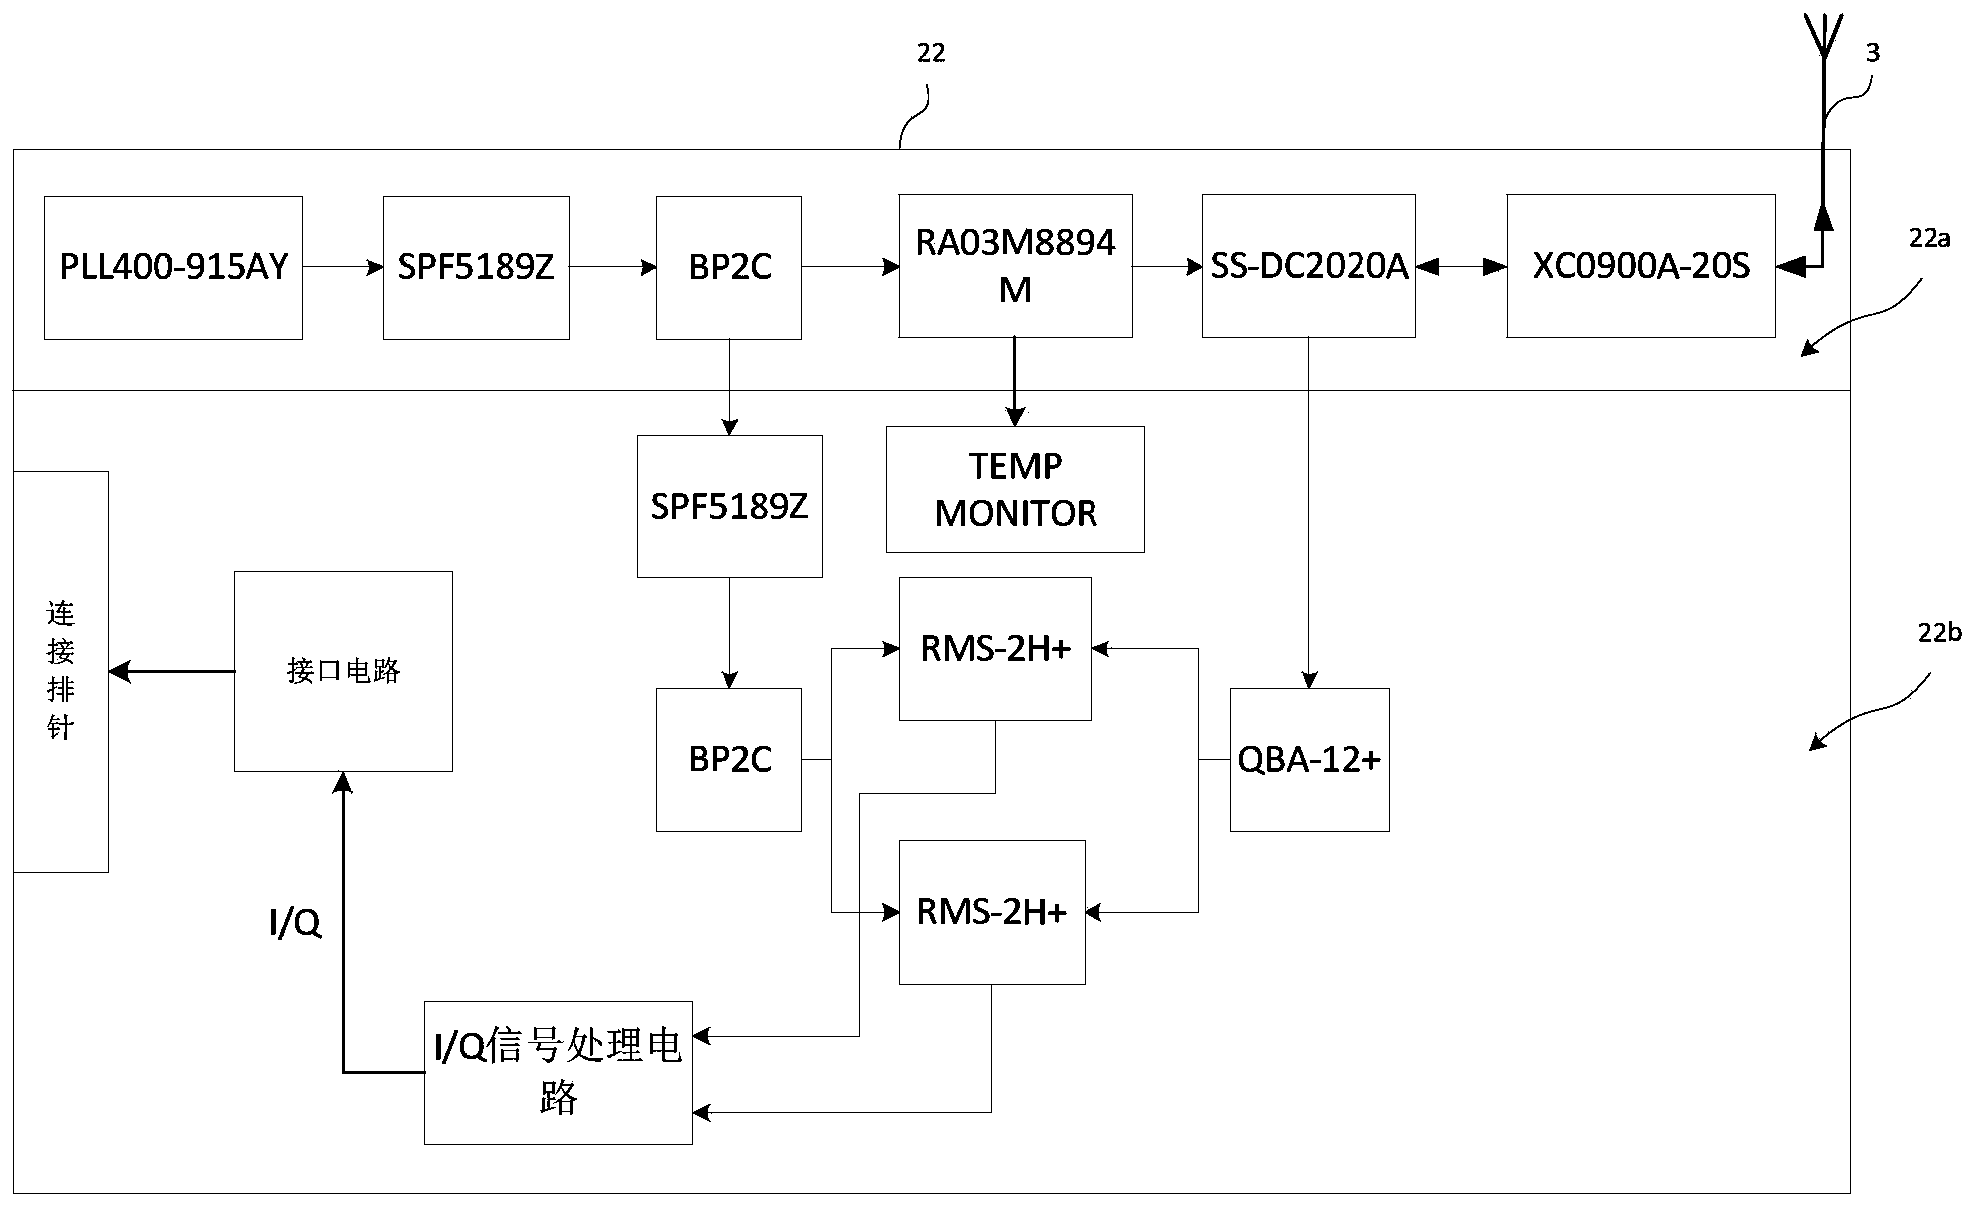 Auto vehicle identification device based on radio frequency identification technology